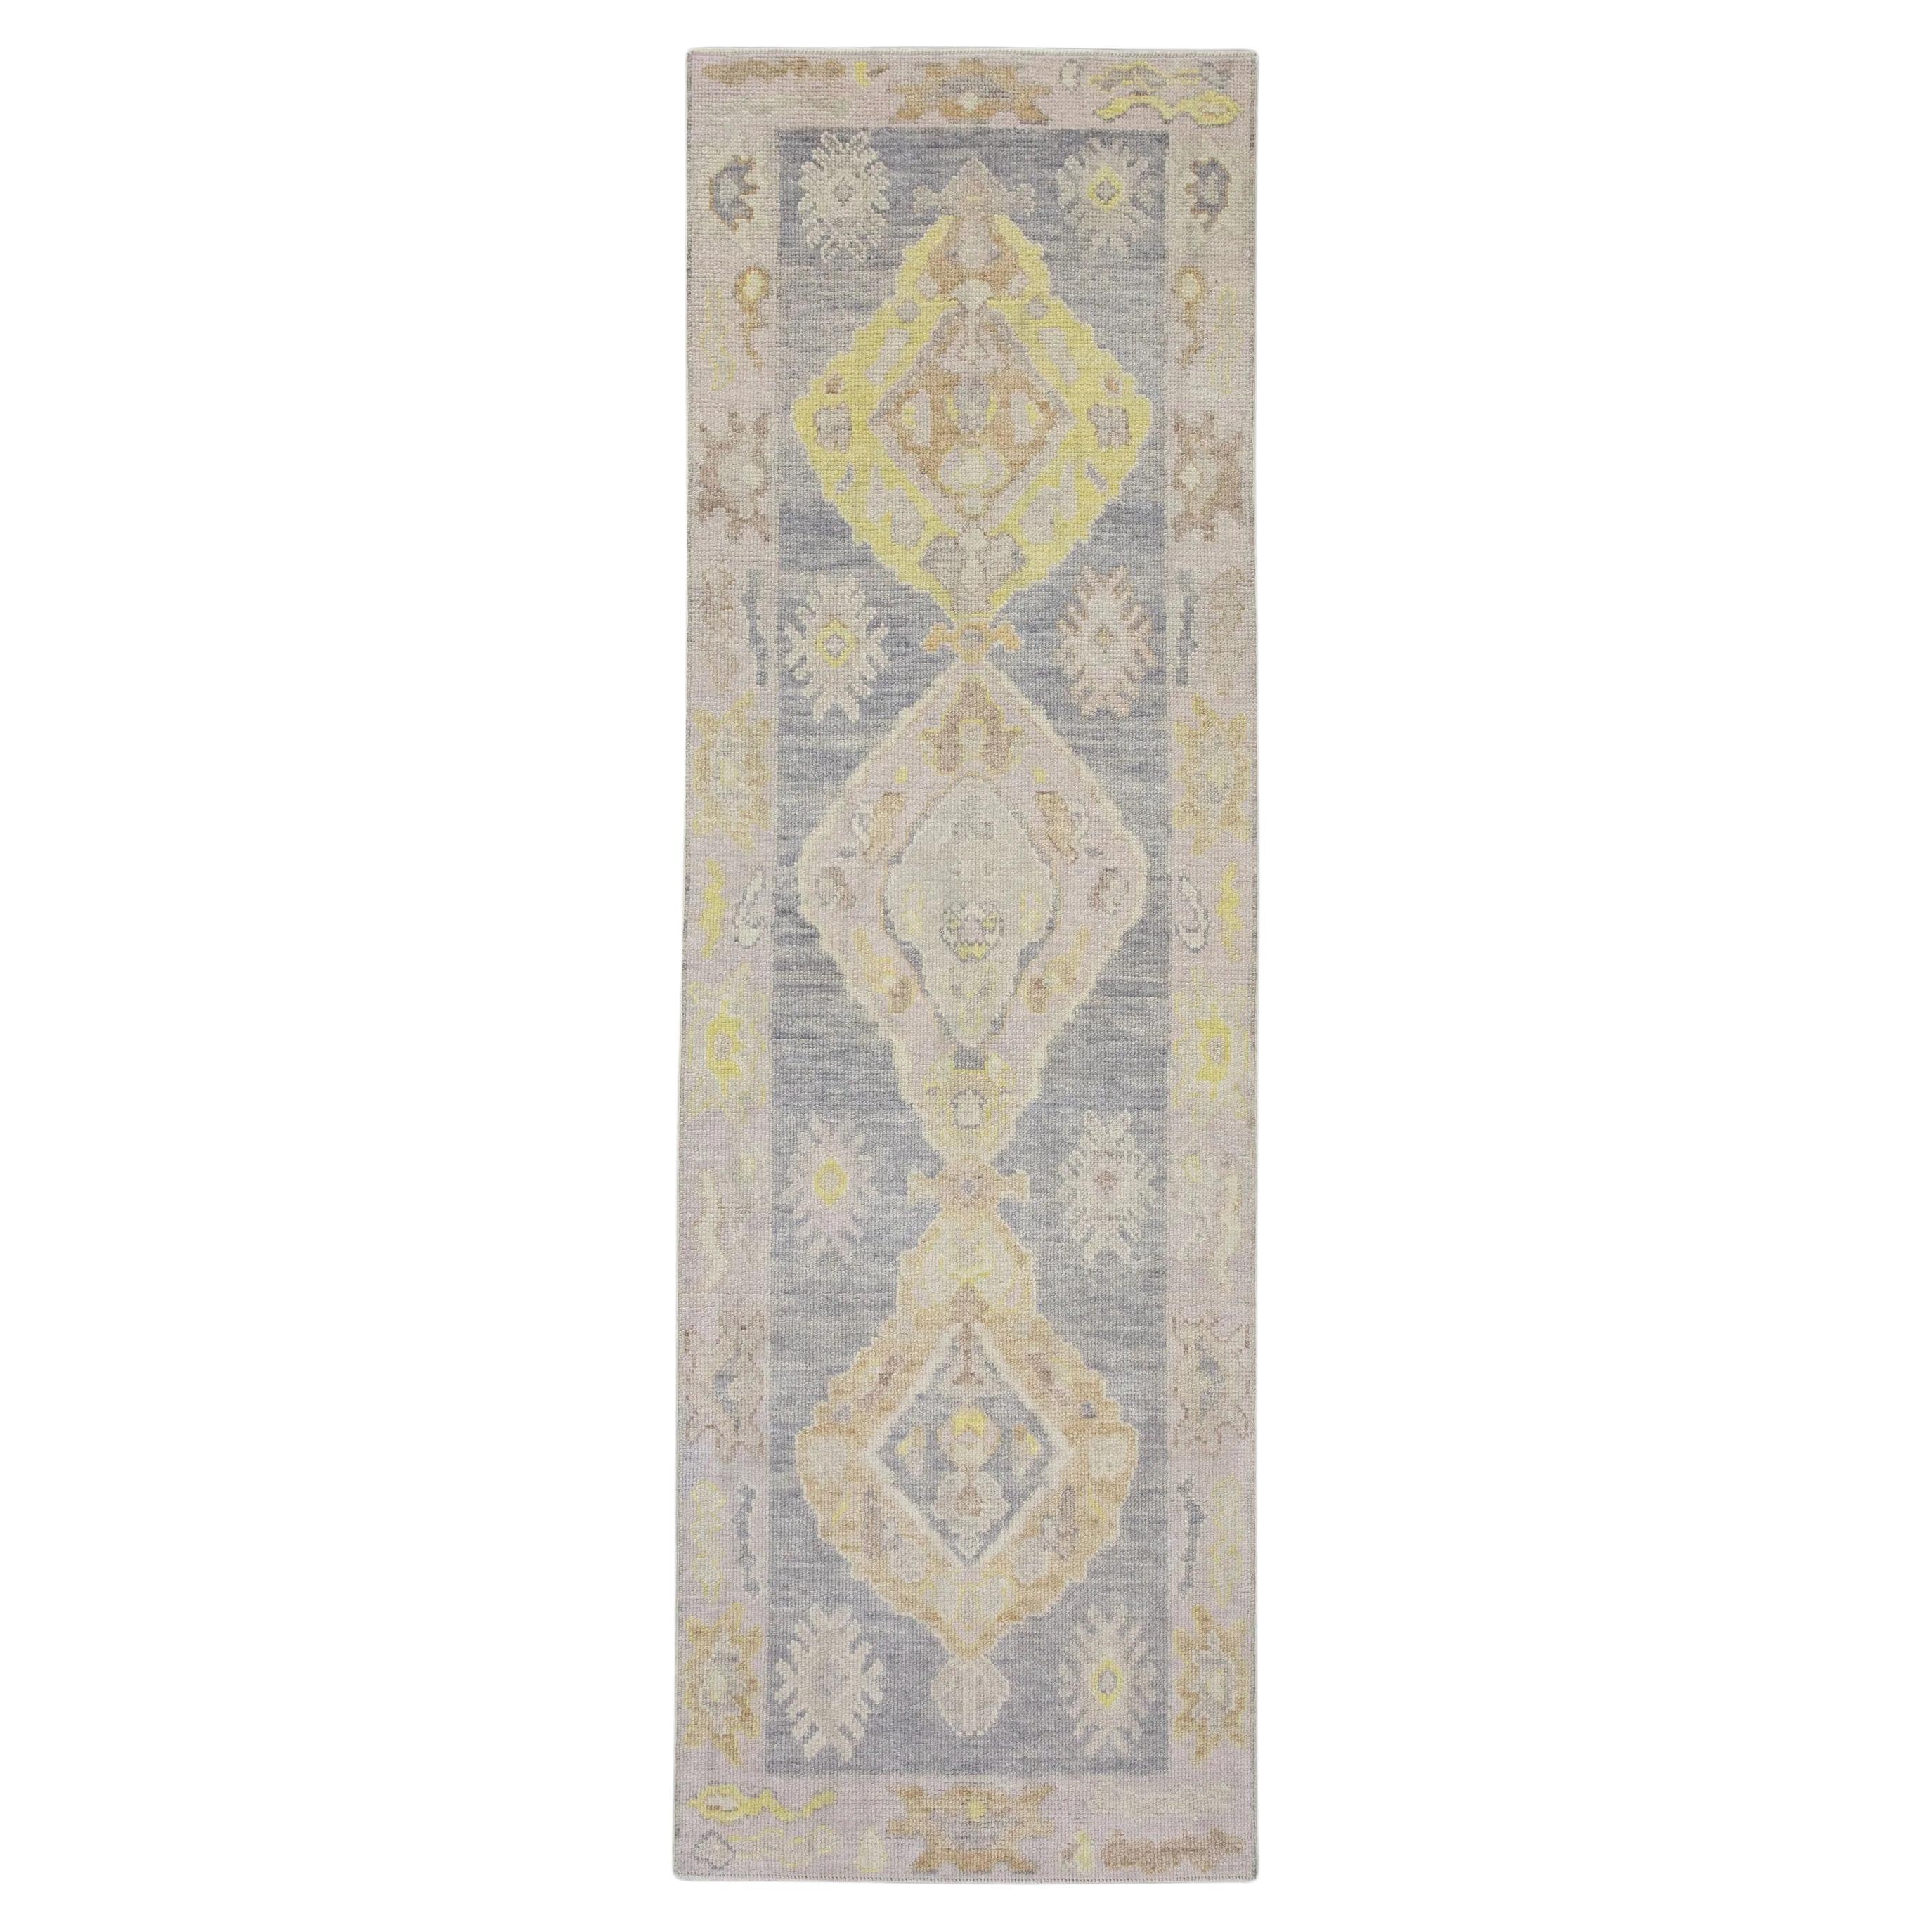 Purple and Yellow Floral Handwoven Wool Turkish Oushak Rug 2'9" x 8'4" For Sale